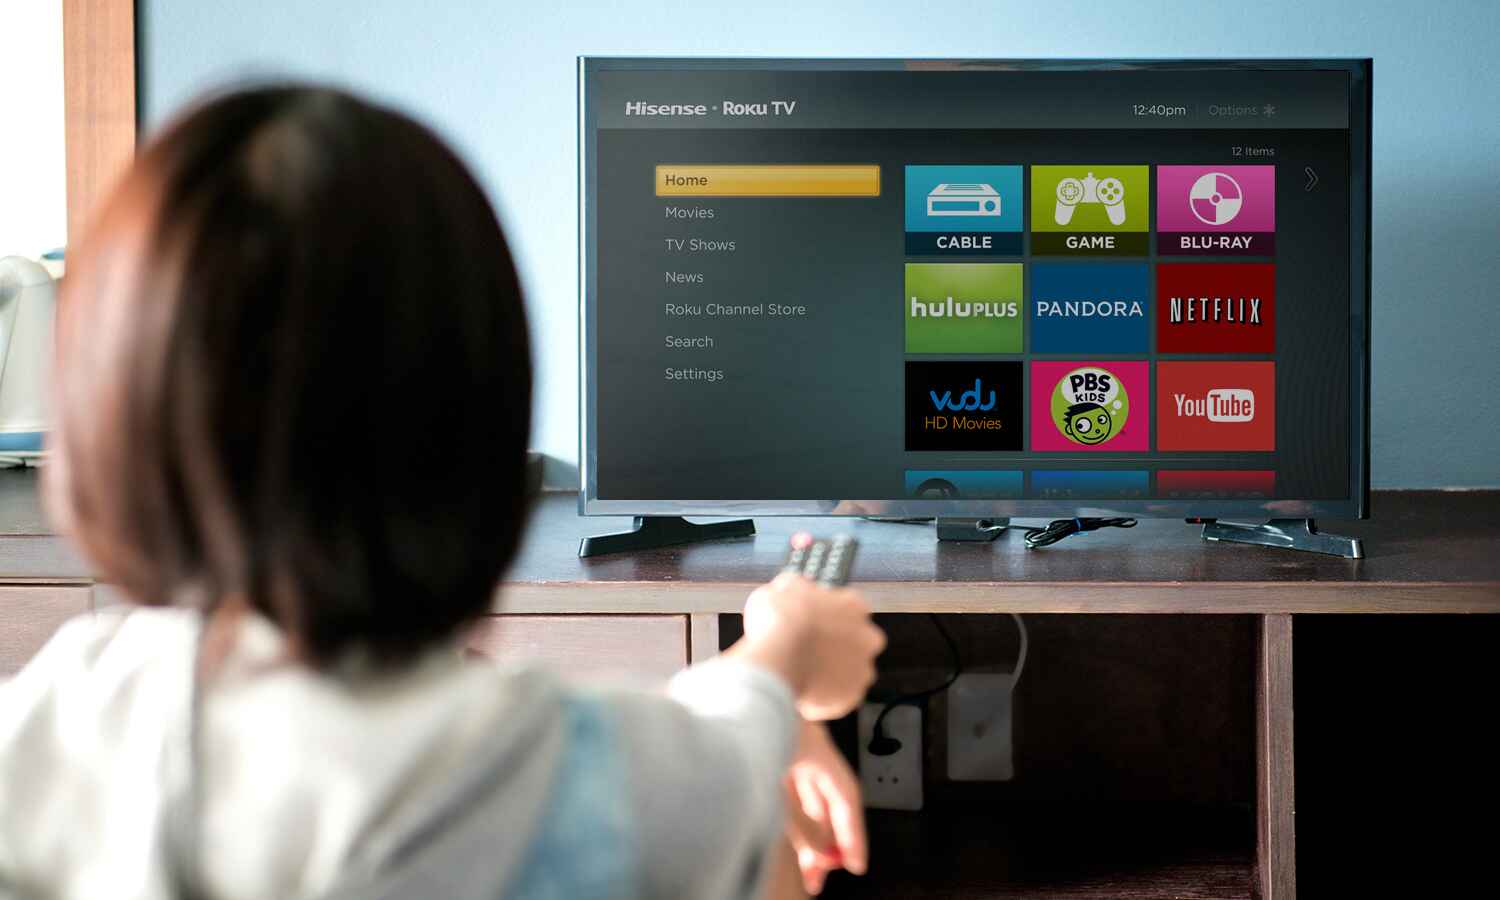 What Can You Do On A Smart TV